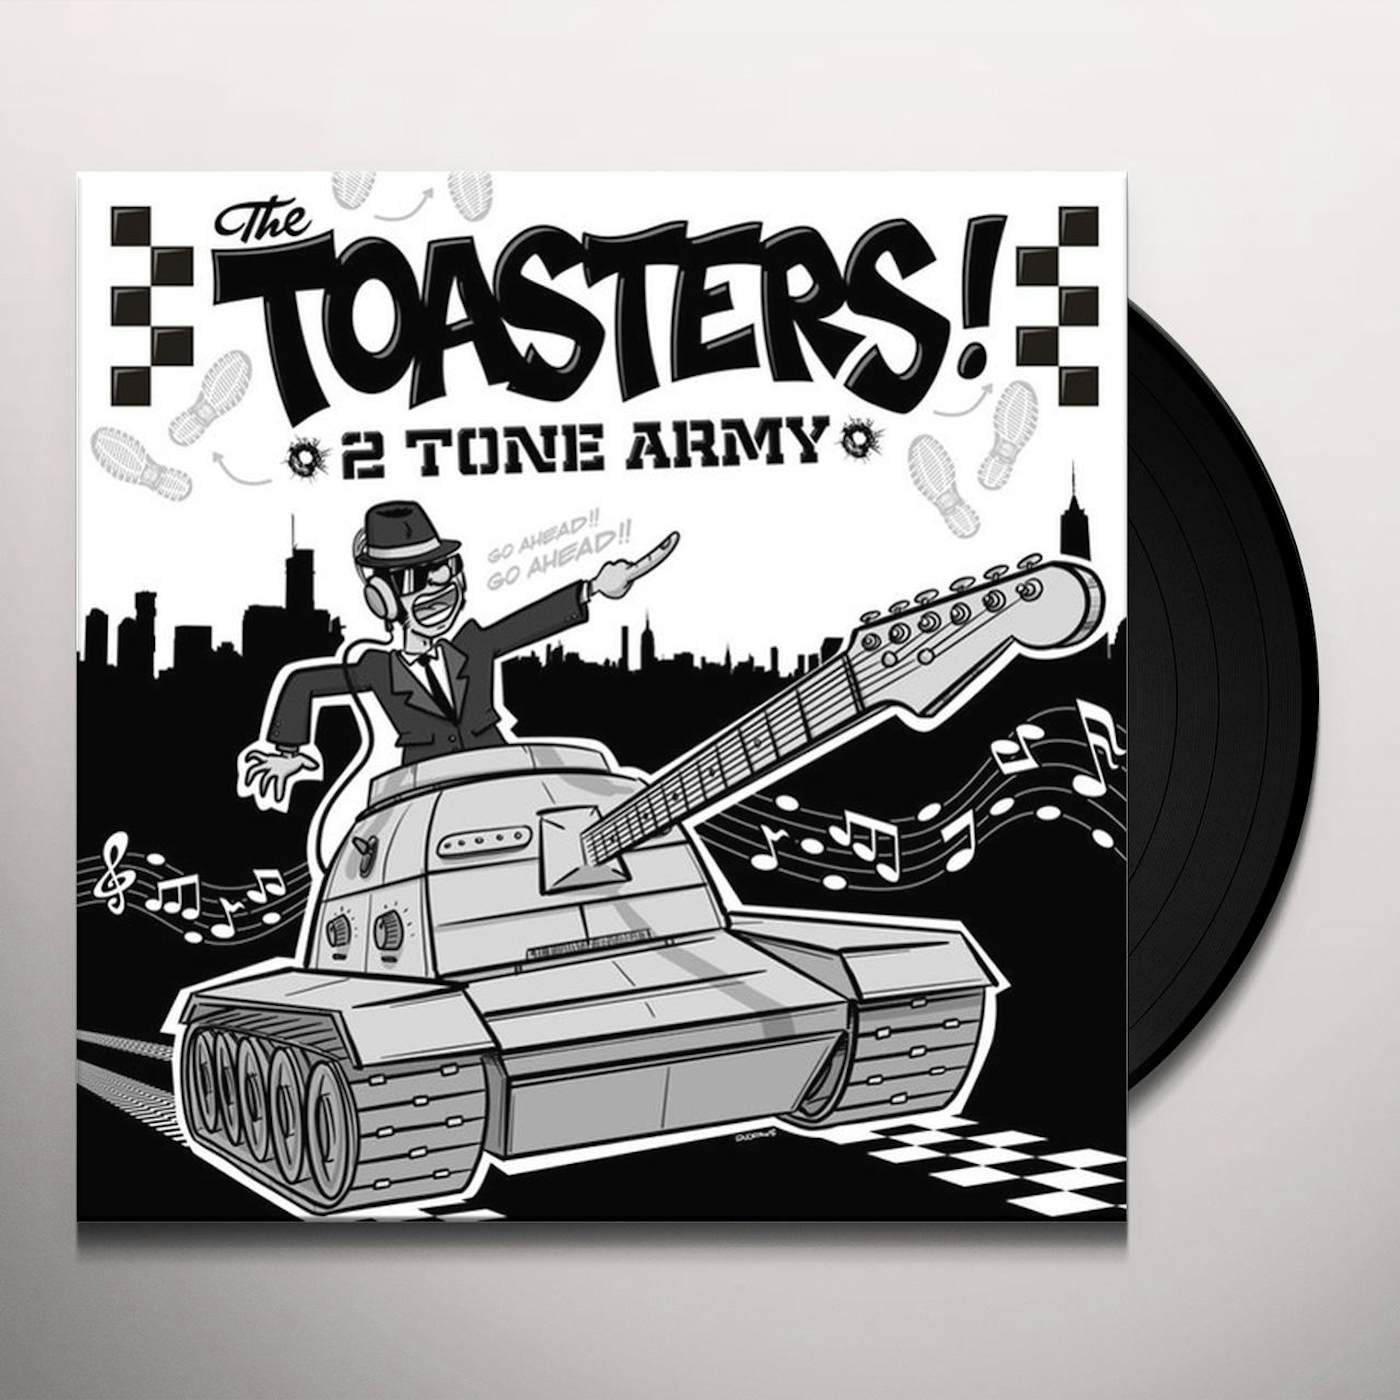 The Toasters 2 TONE ARMY Vinyl Record